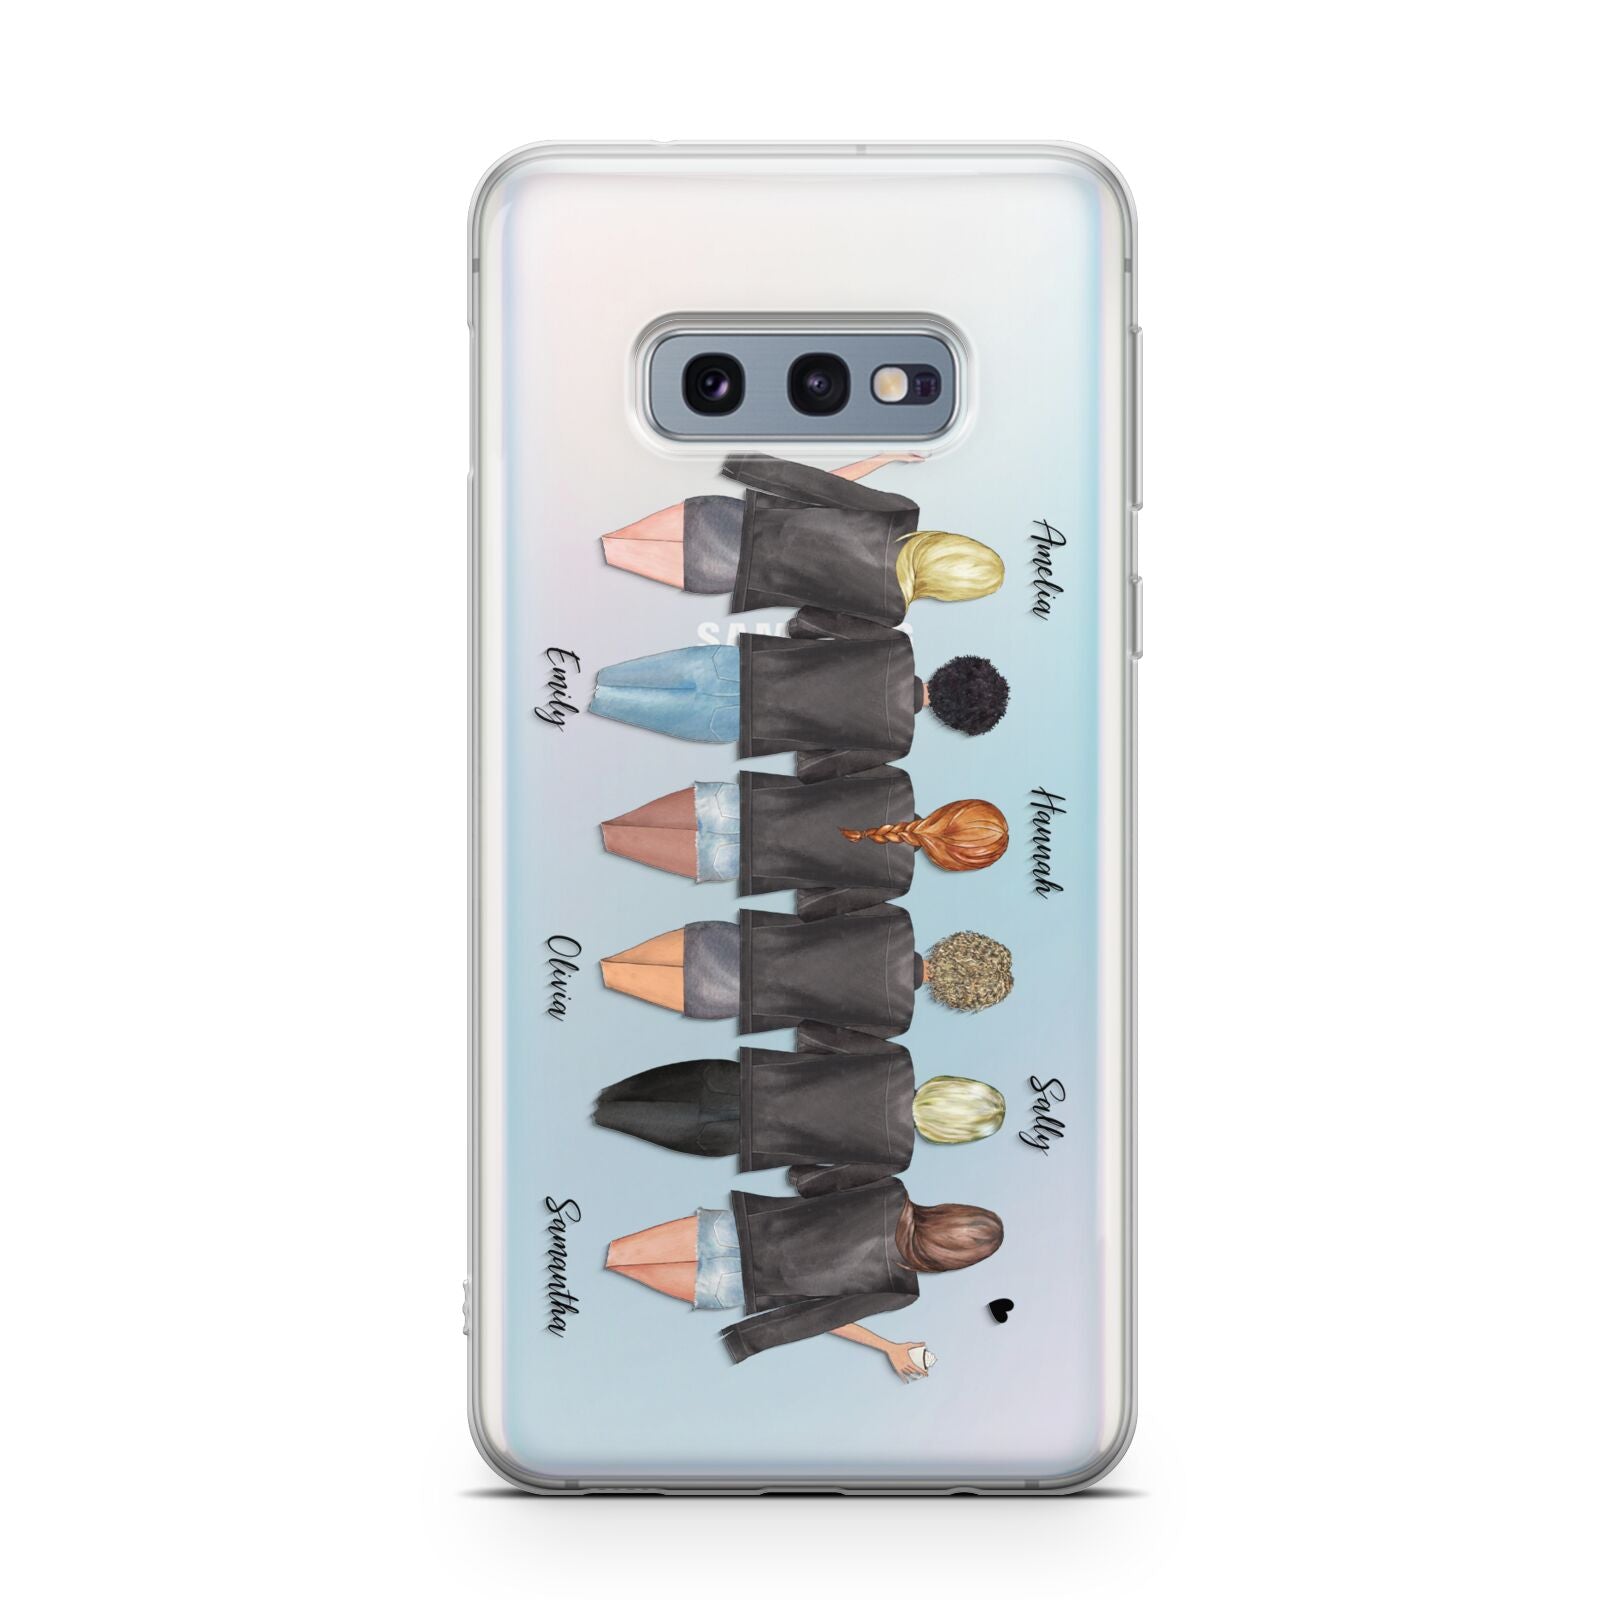 6 Best Friends with Names Samsung Galaxy S10E Case